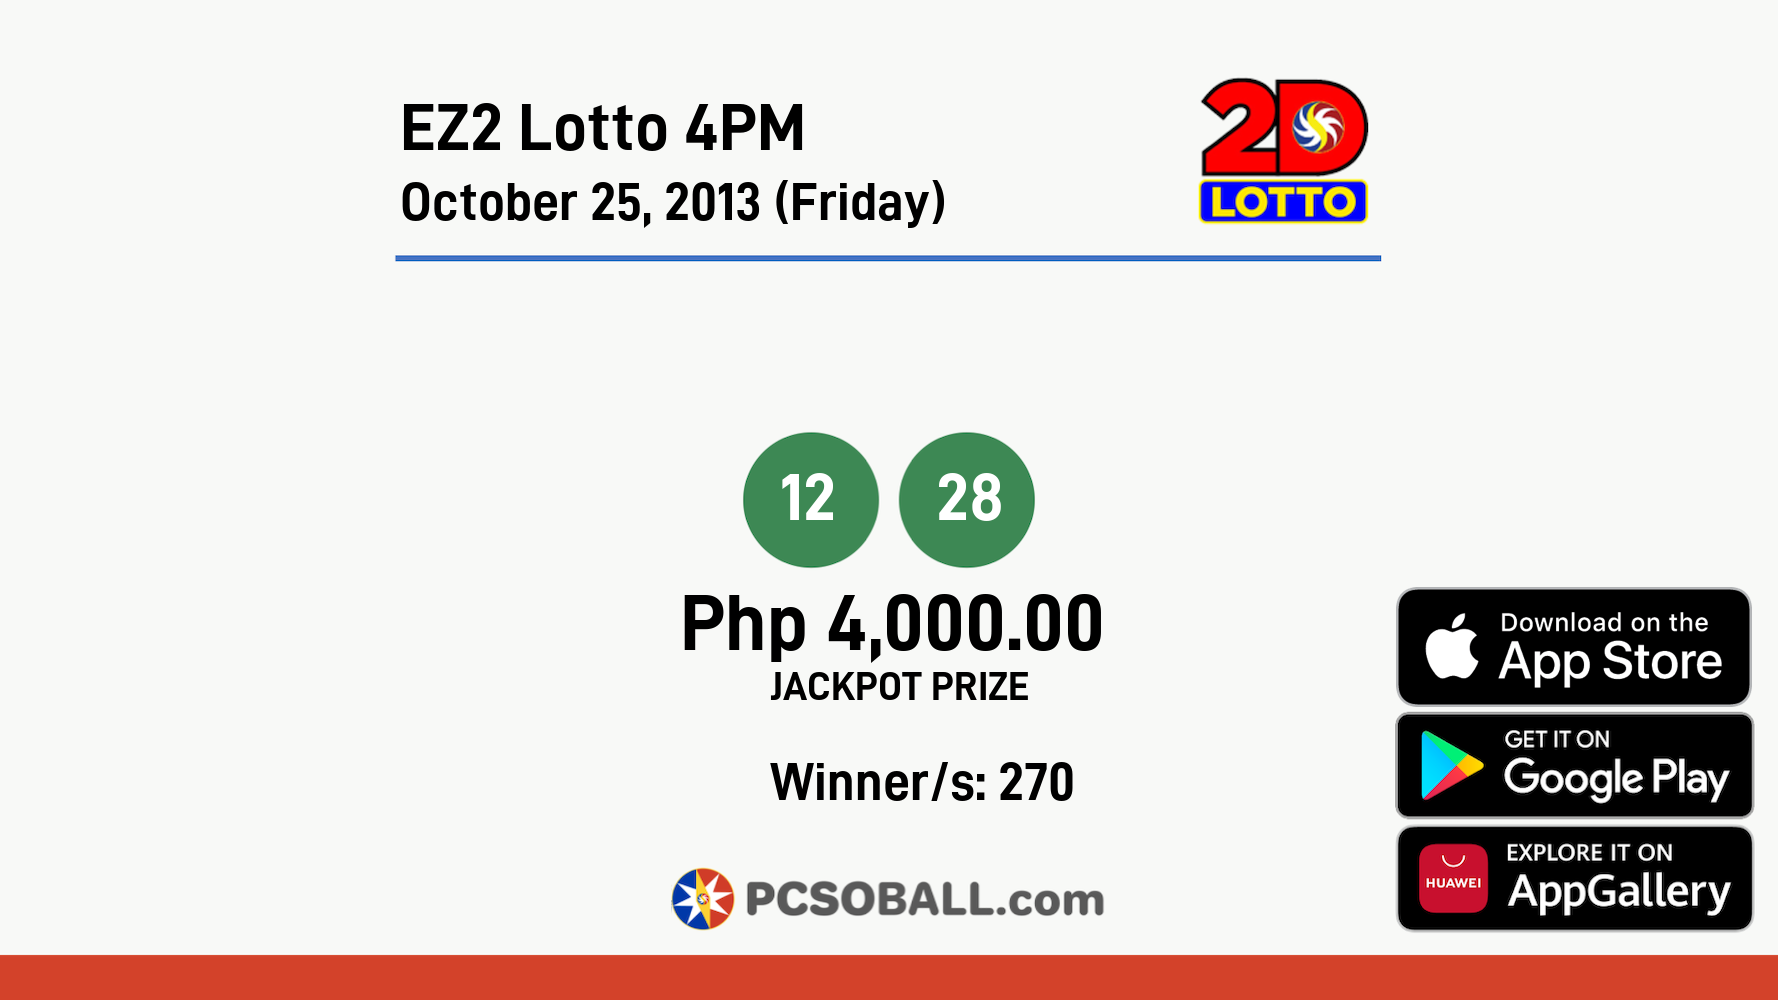 EZ2 Lotto 4PM October 25, 2013 (Friday) Result